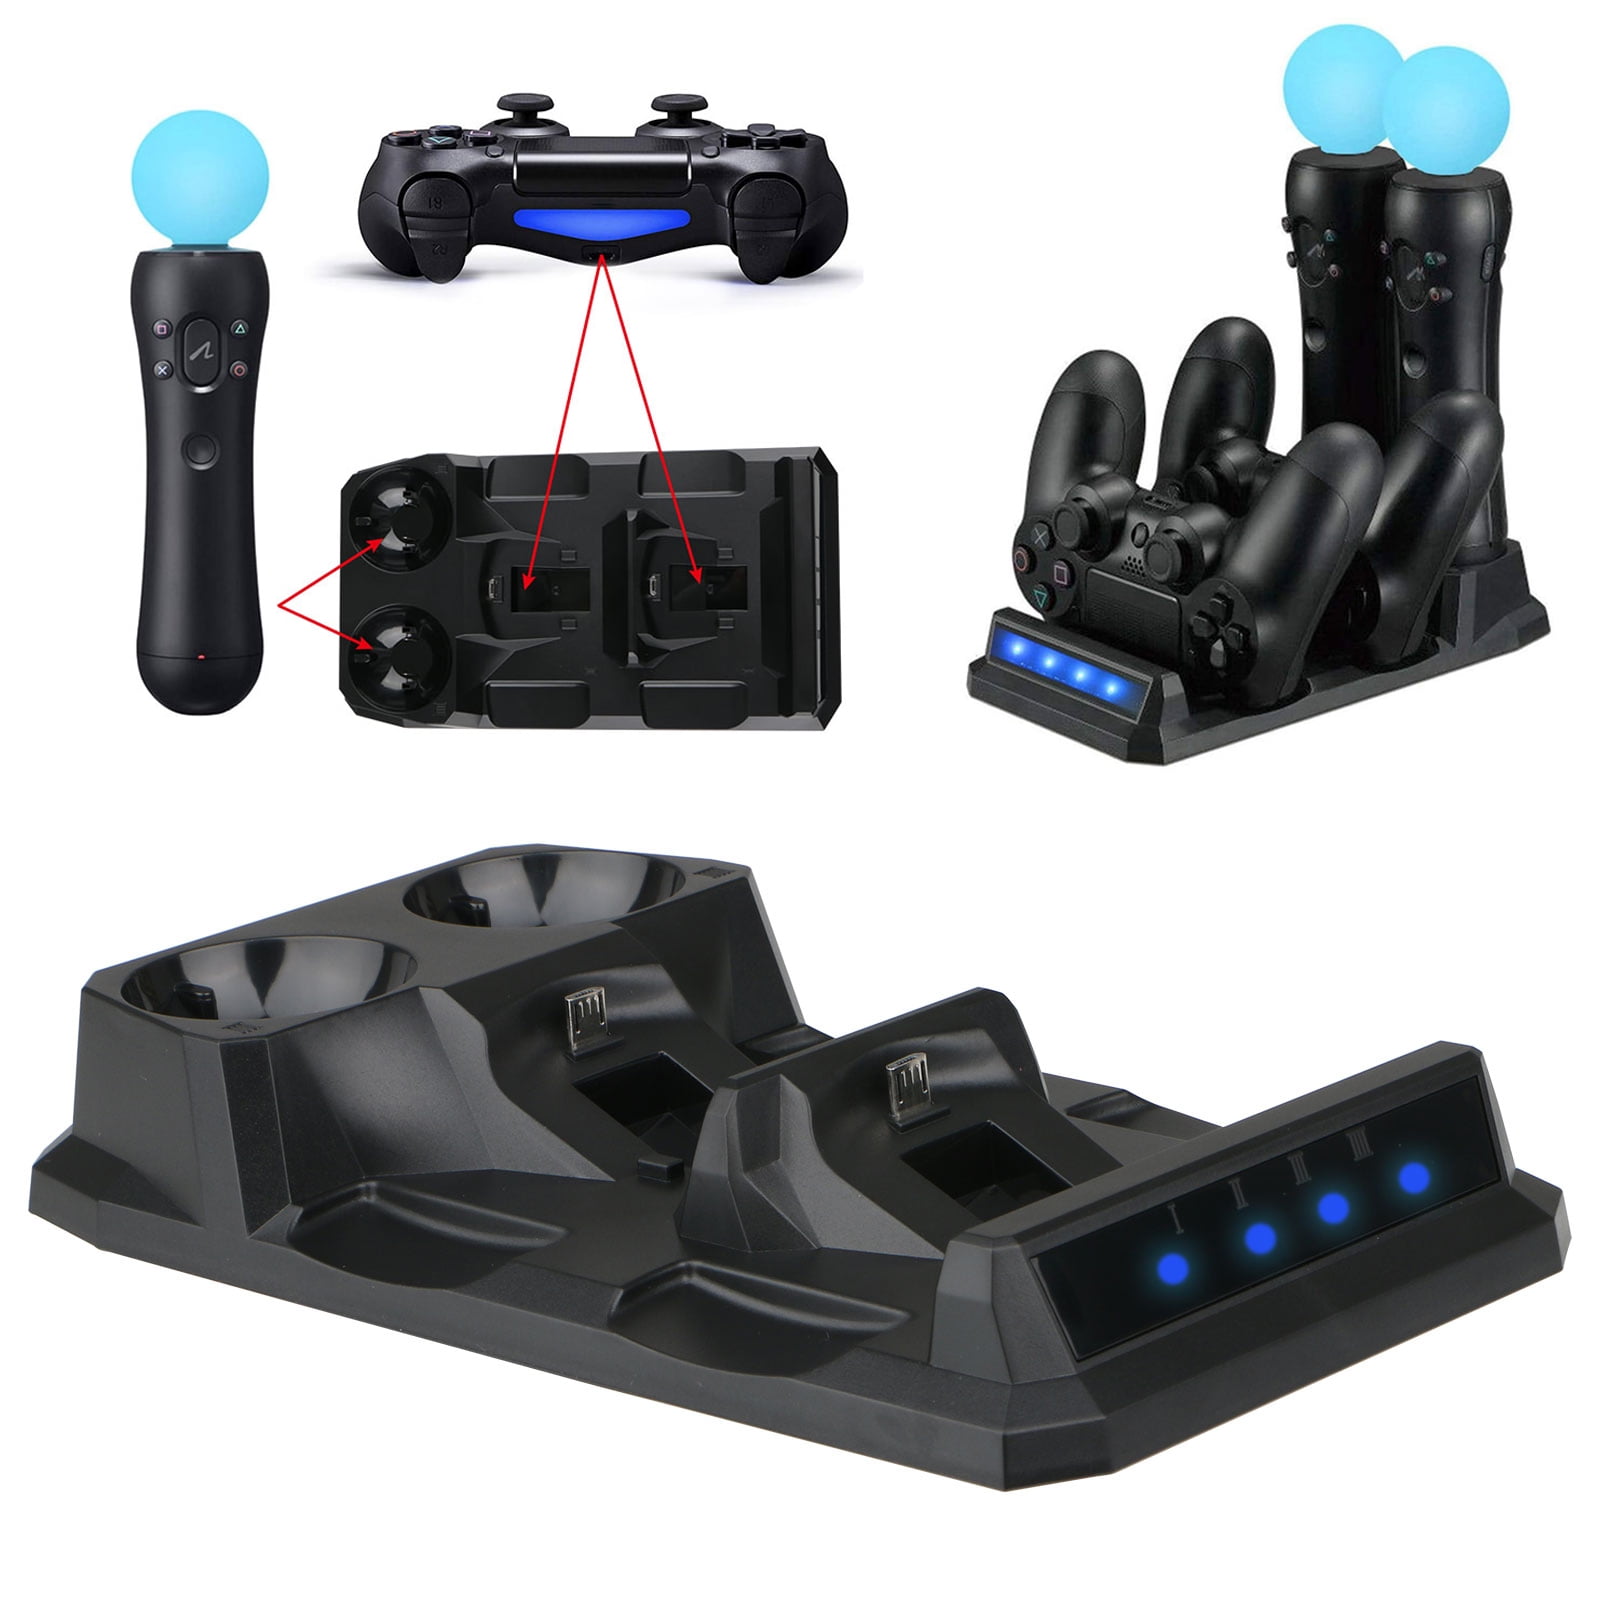 leidersty USB Charging Dock Station for Playstation 4 PS4 Slim Pro PS VR PS Move Accessories,Black 